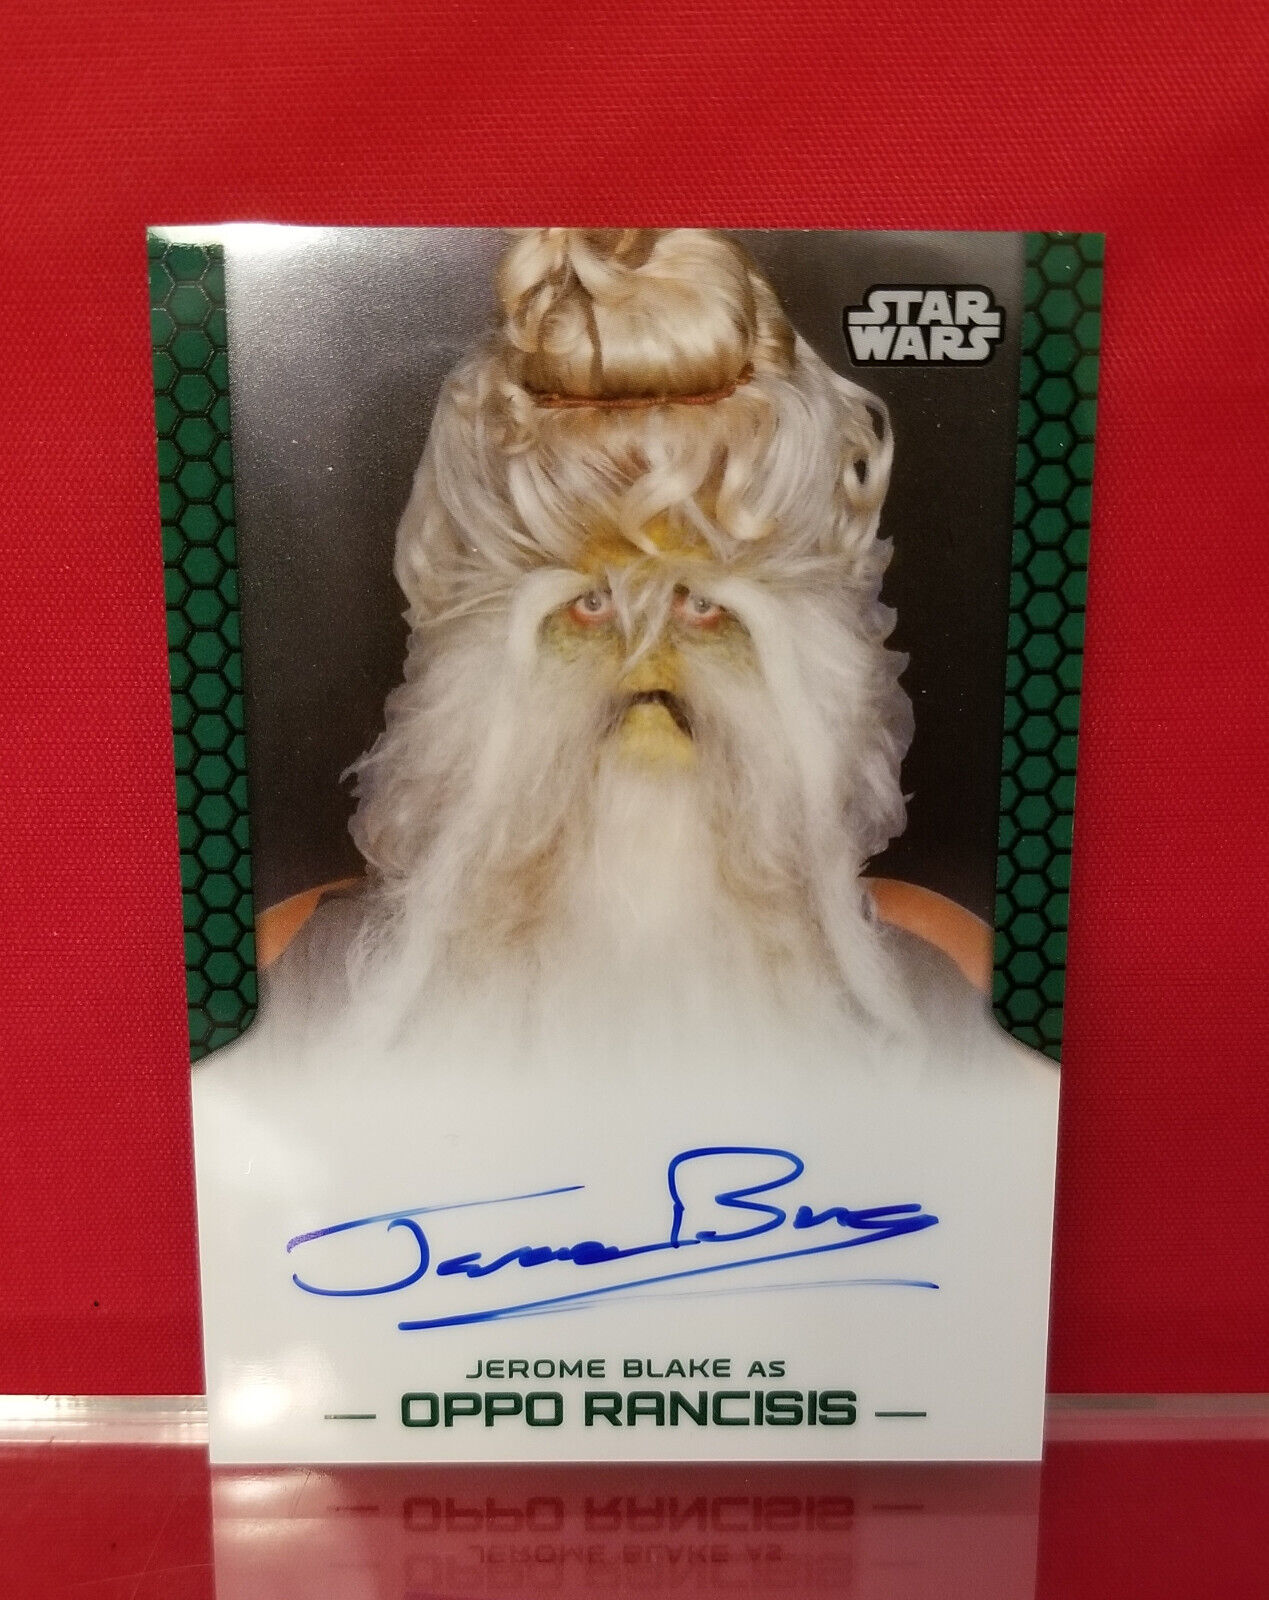 Star Wars 2015 Chrome Perspectives Jerome Blake as Oppo Rancisis Autograph Card